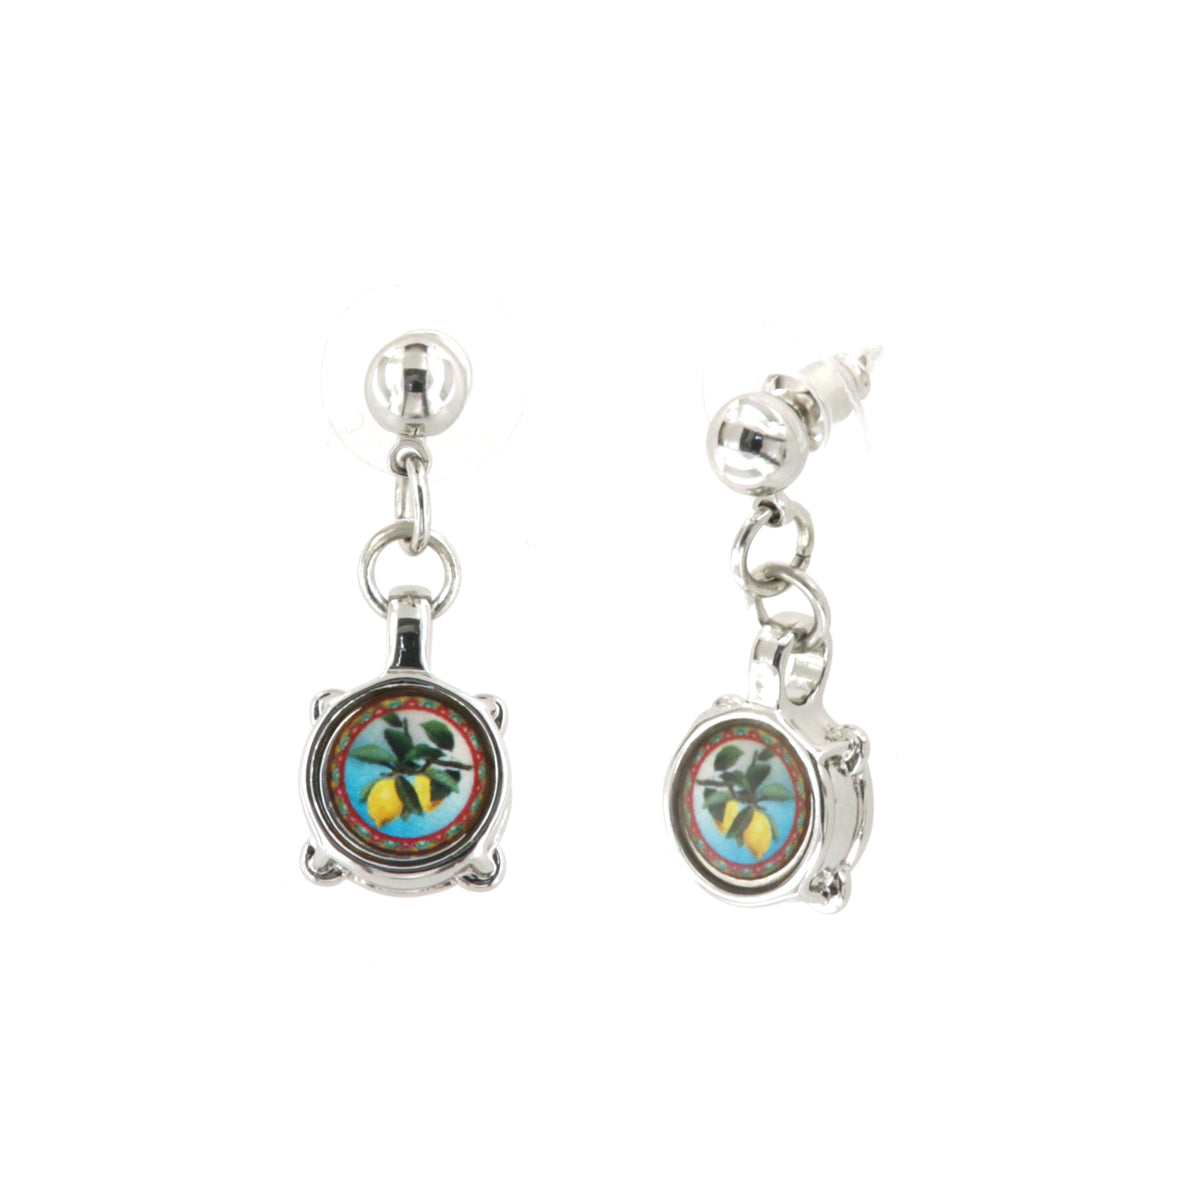 Metal earrings pendant tambourines with Sicilian lemons design embellished with colored glazes